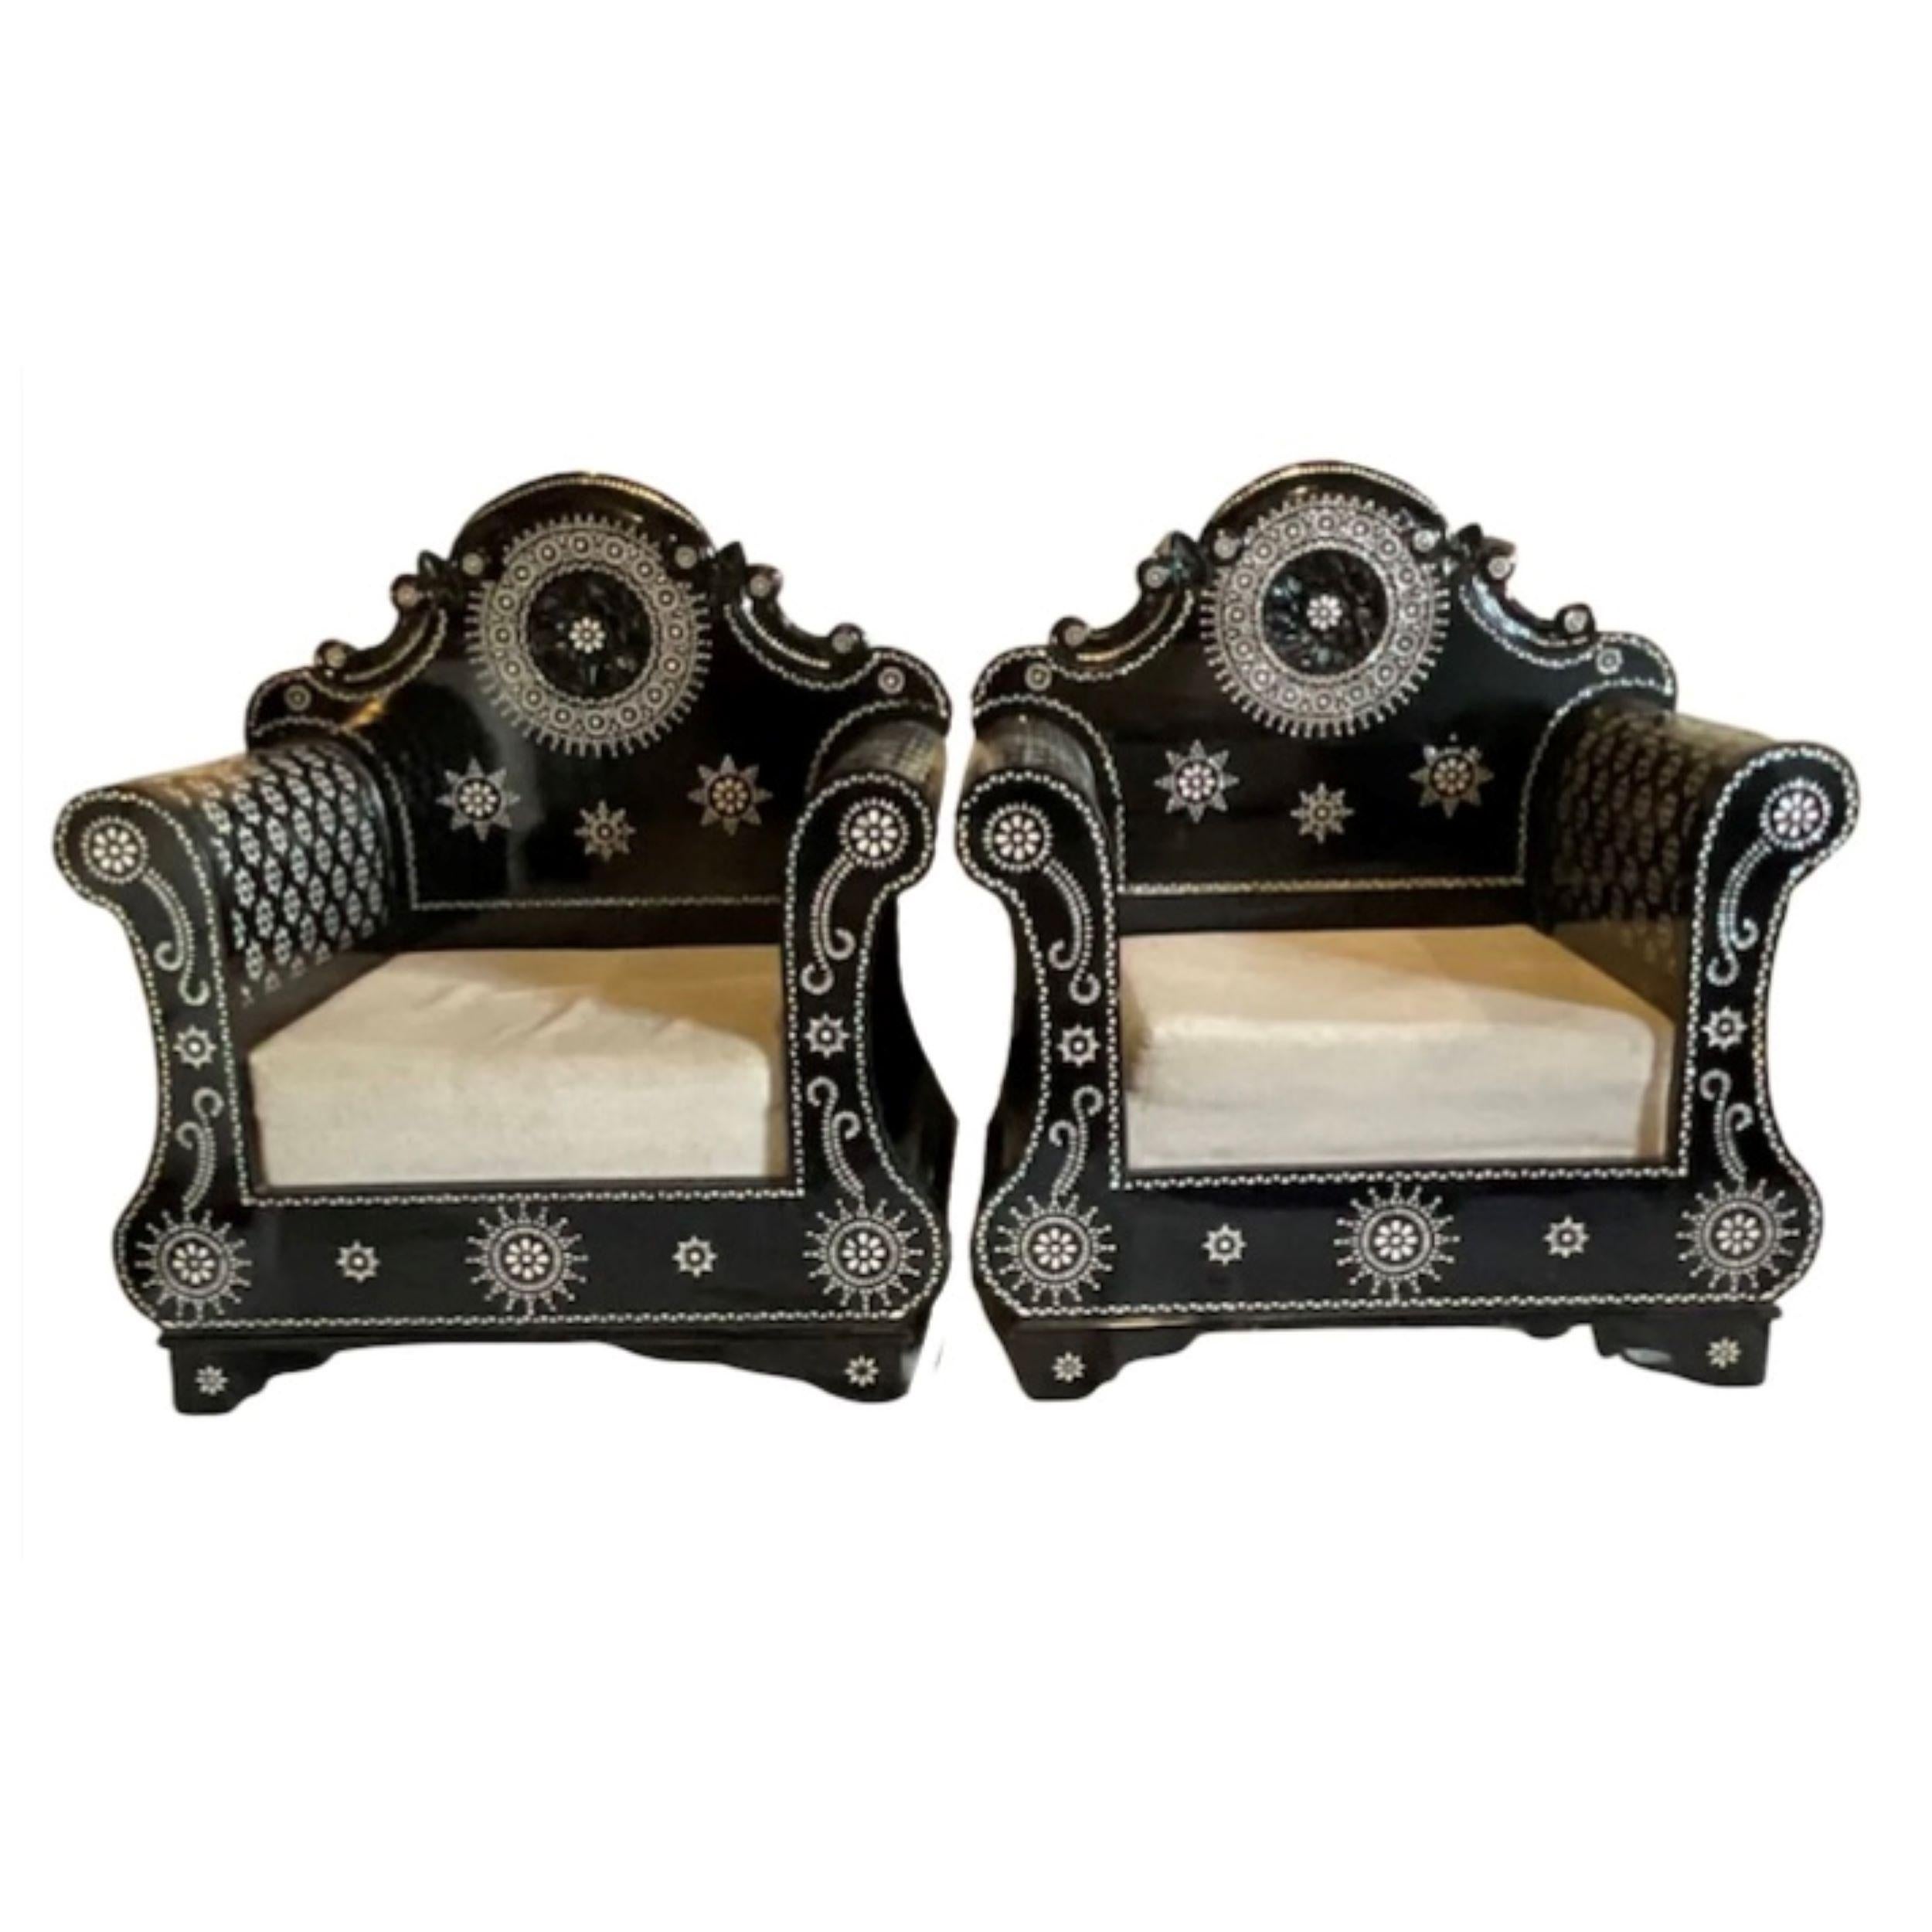 Early 20th Century Pair of Indian Mother of Pearl Inlay Chairs